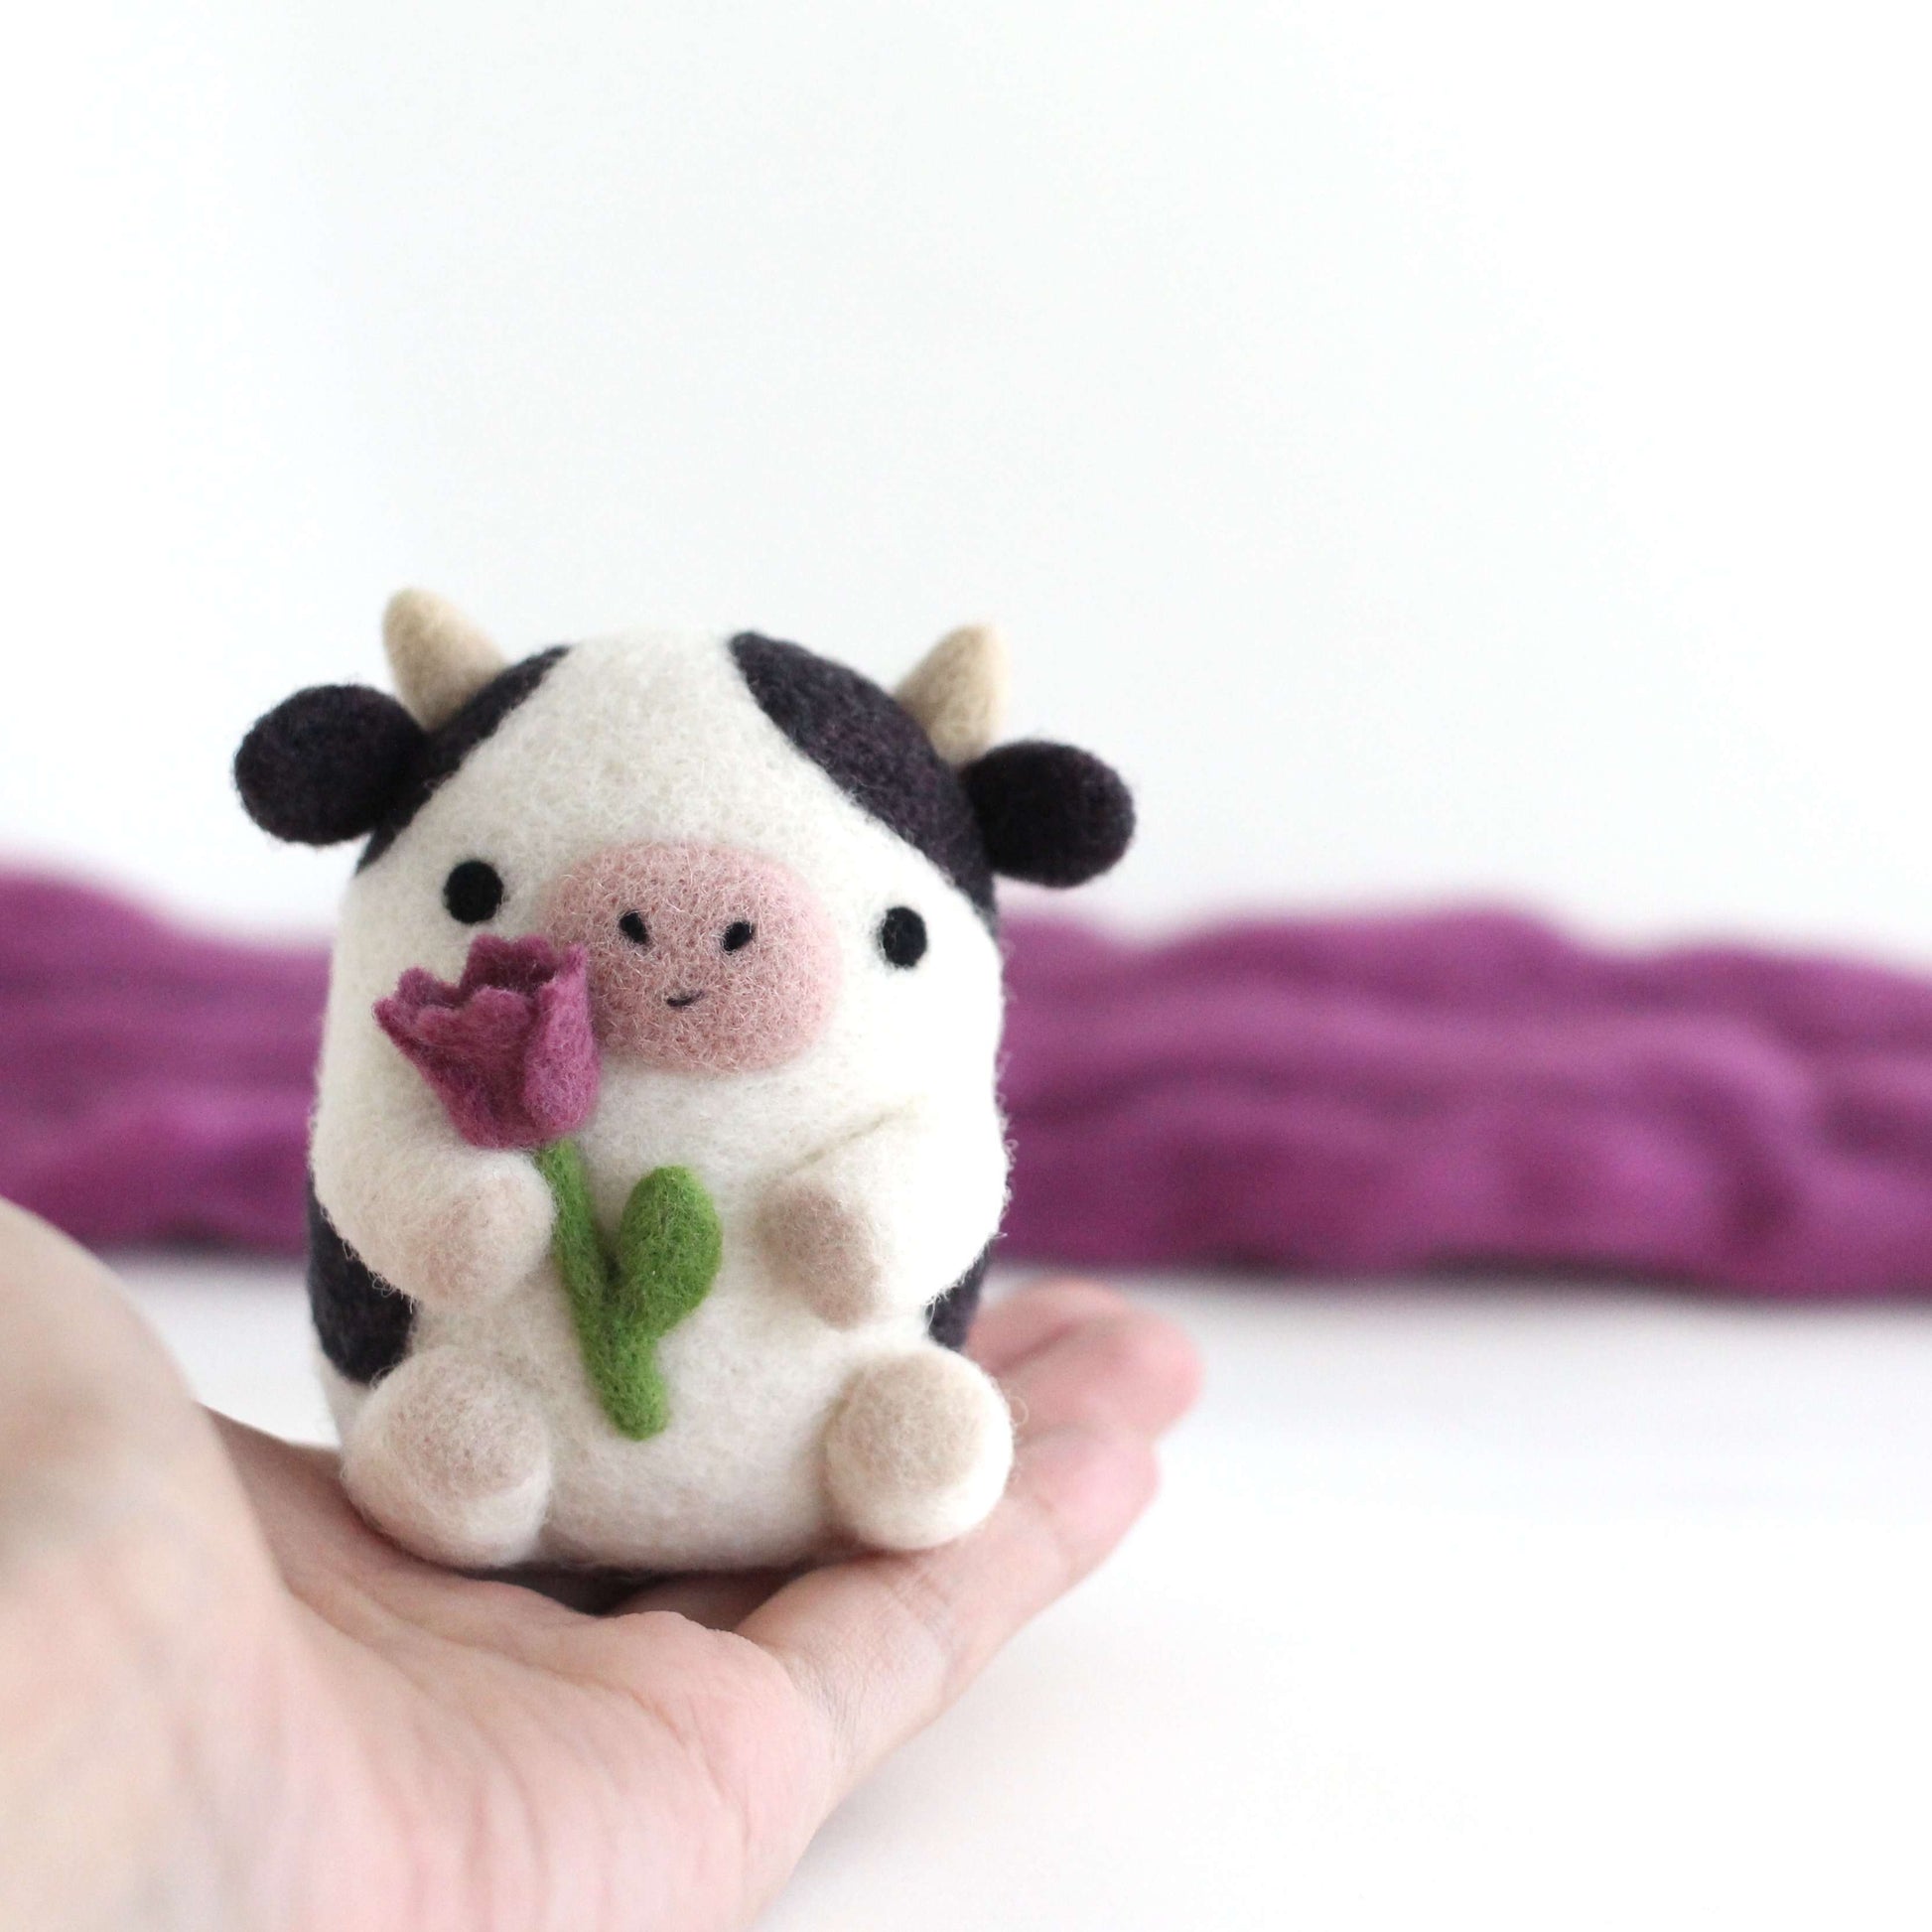 Needle Felted Cow holding Tulip by Wild Whimsy Woolies